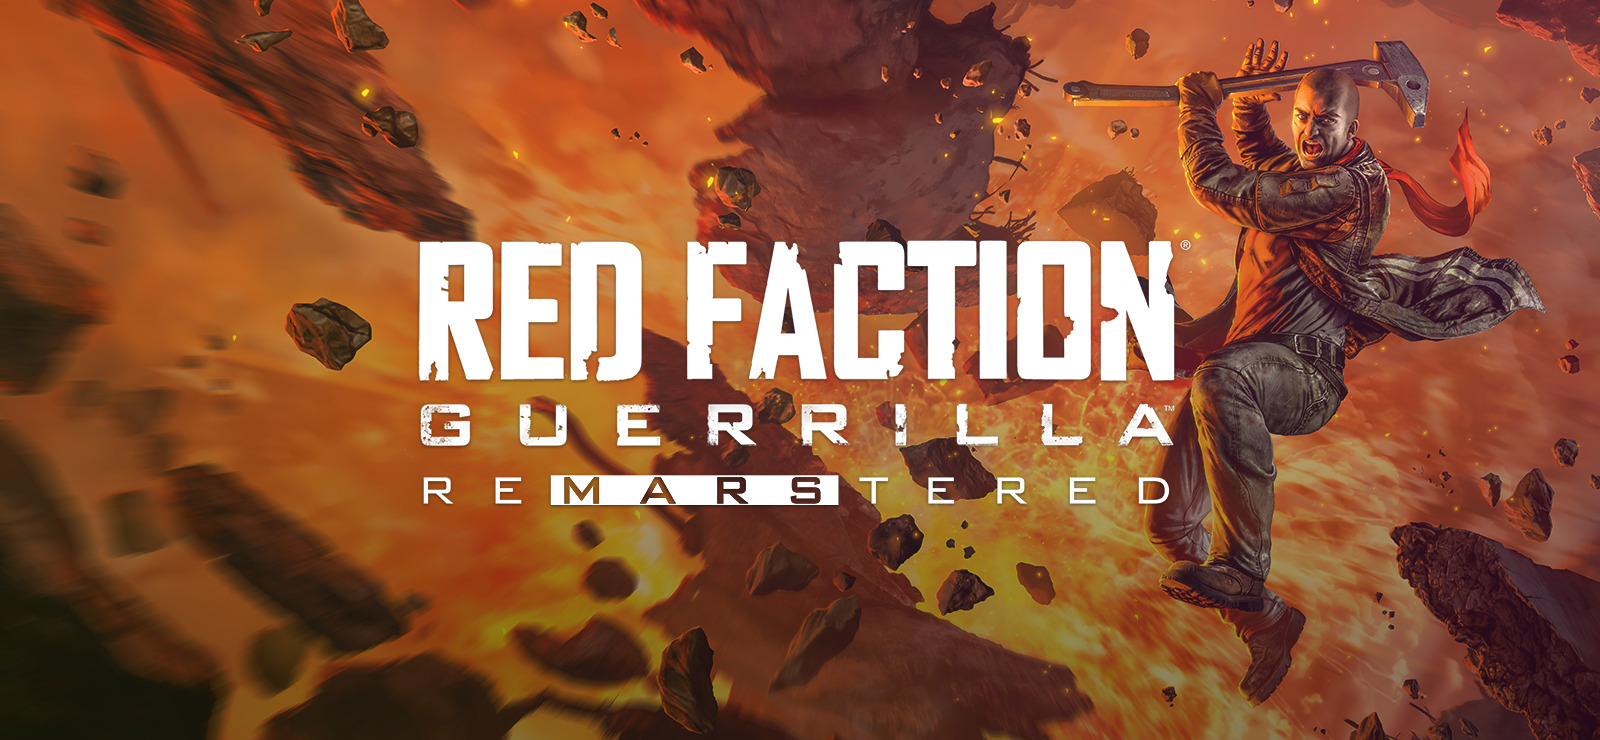 Red Faction Guerrilla Re-Mars-tered on